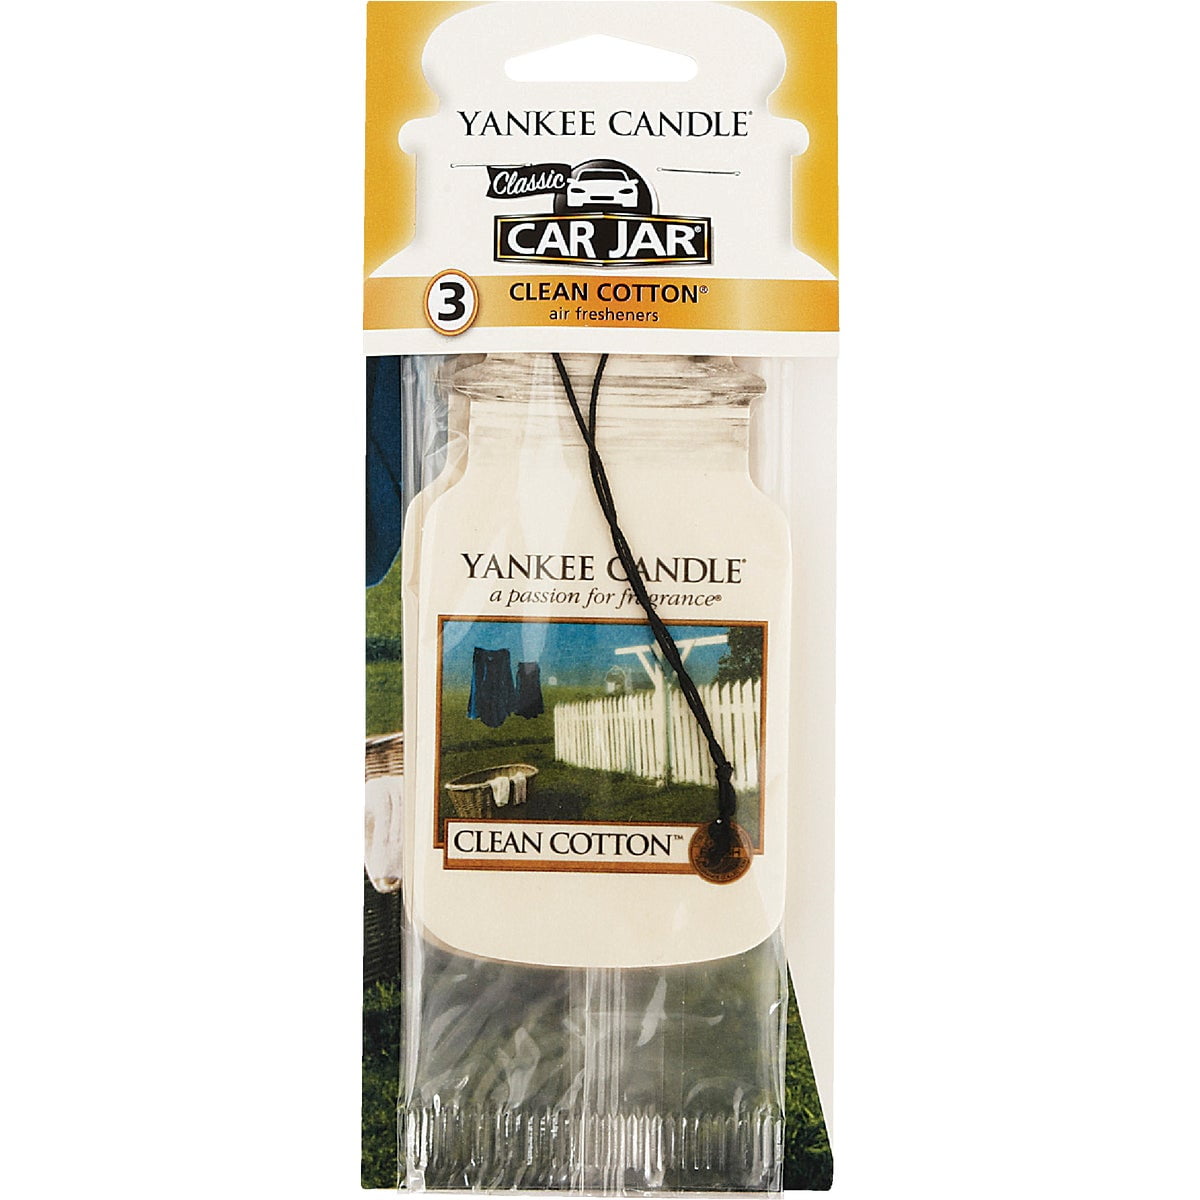 Yankee Candle Midsummer's Night Whole Home Air Freshener, 4 Pack